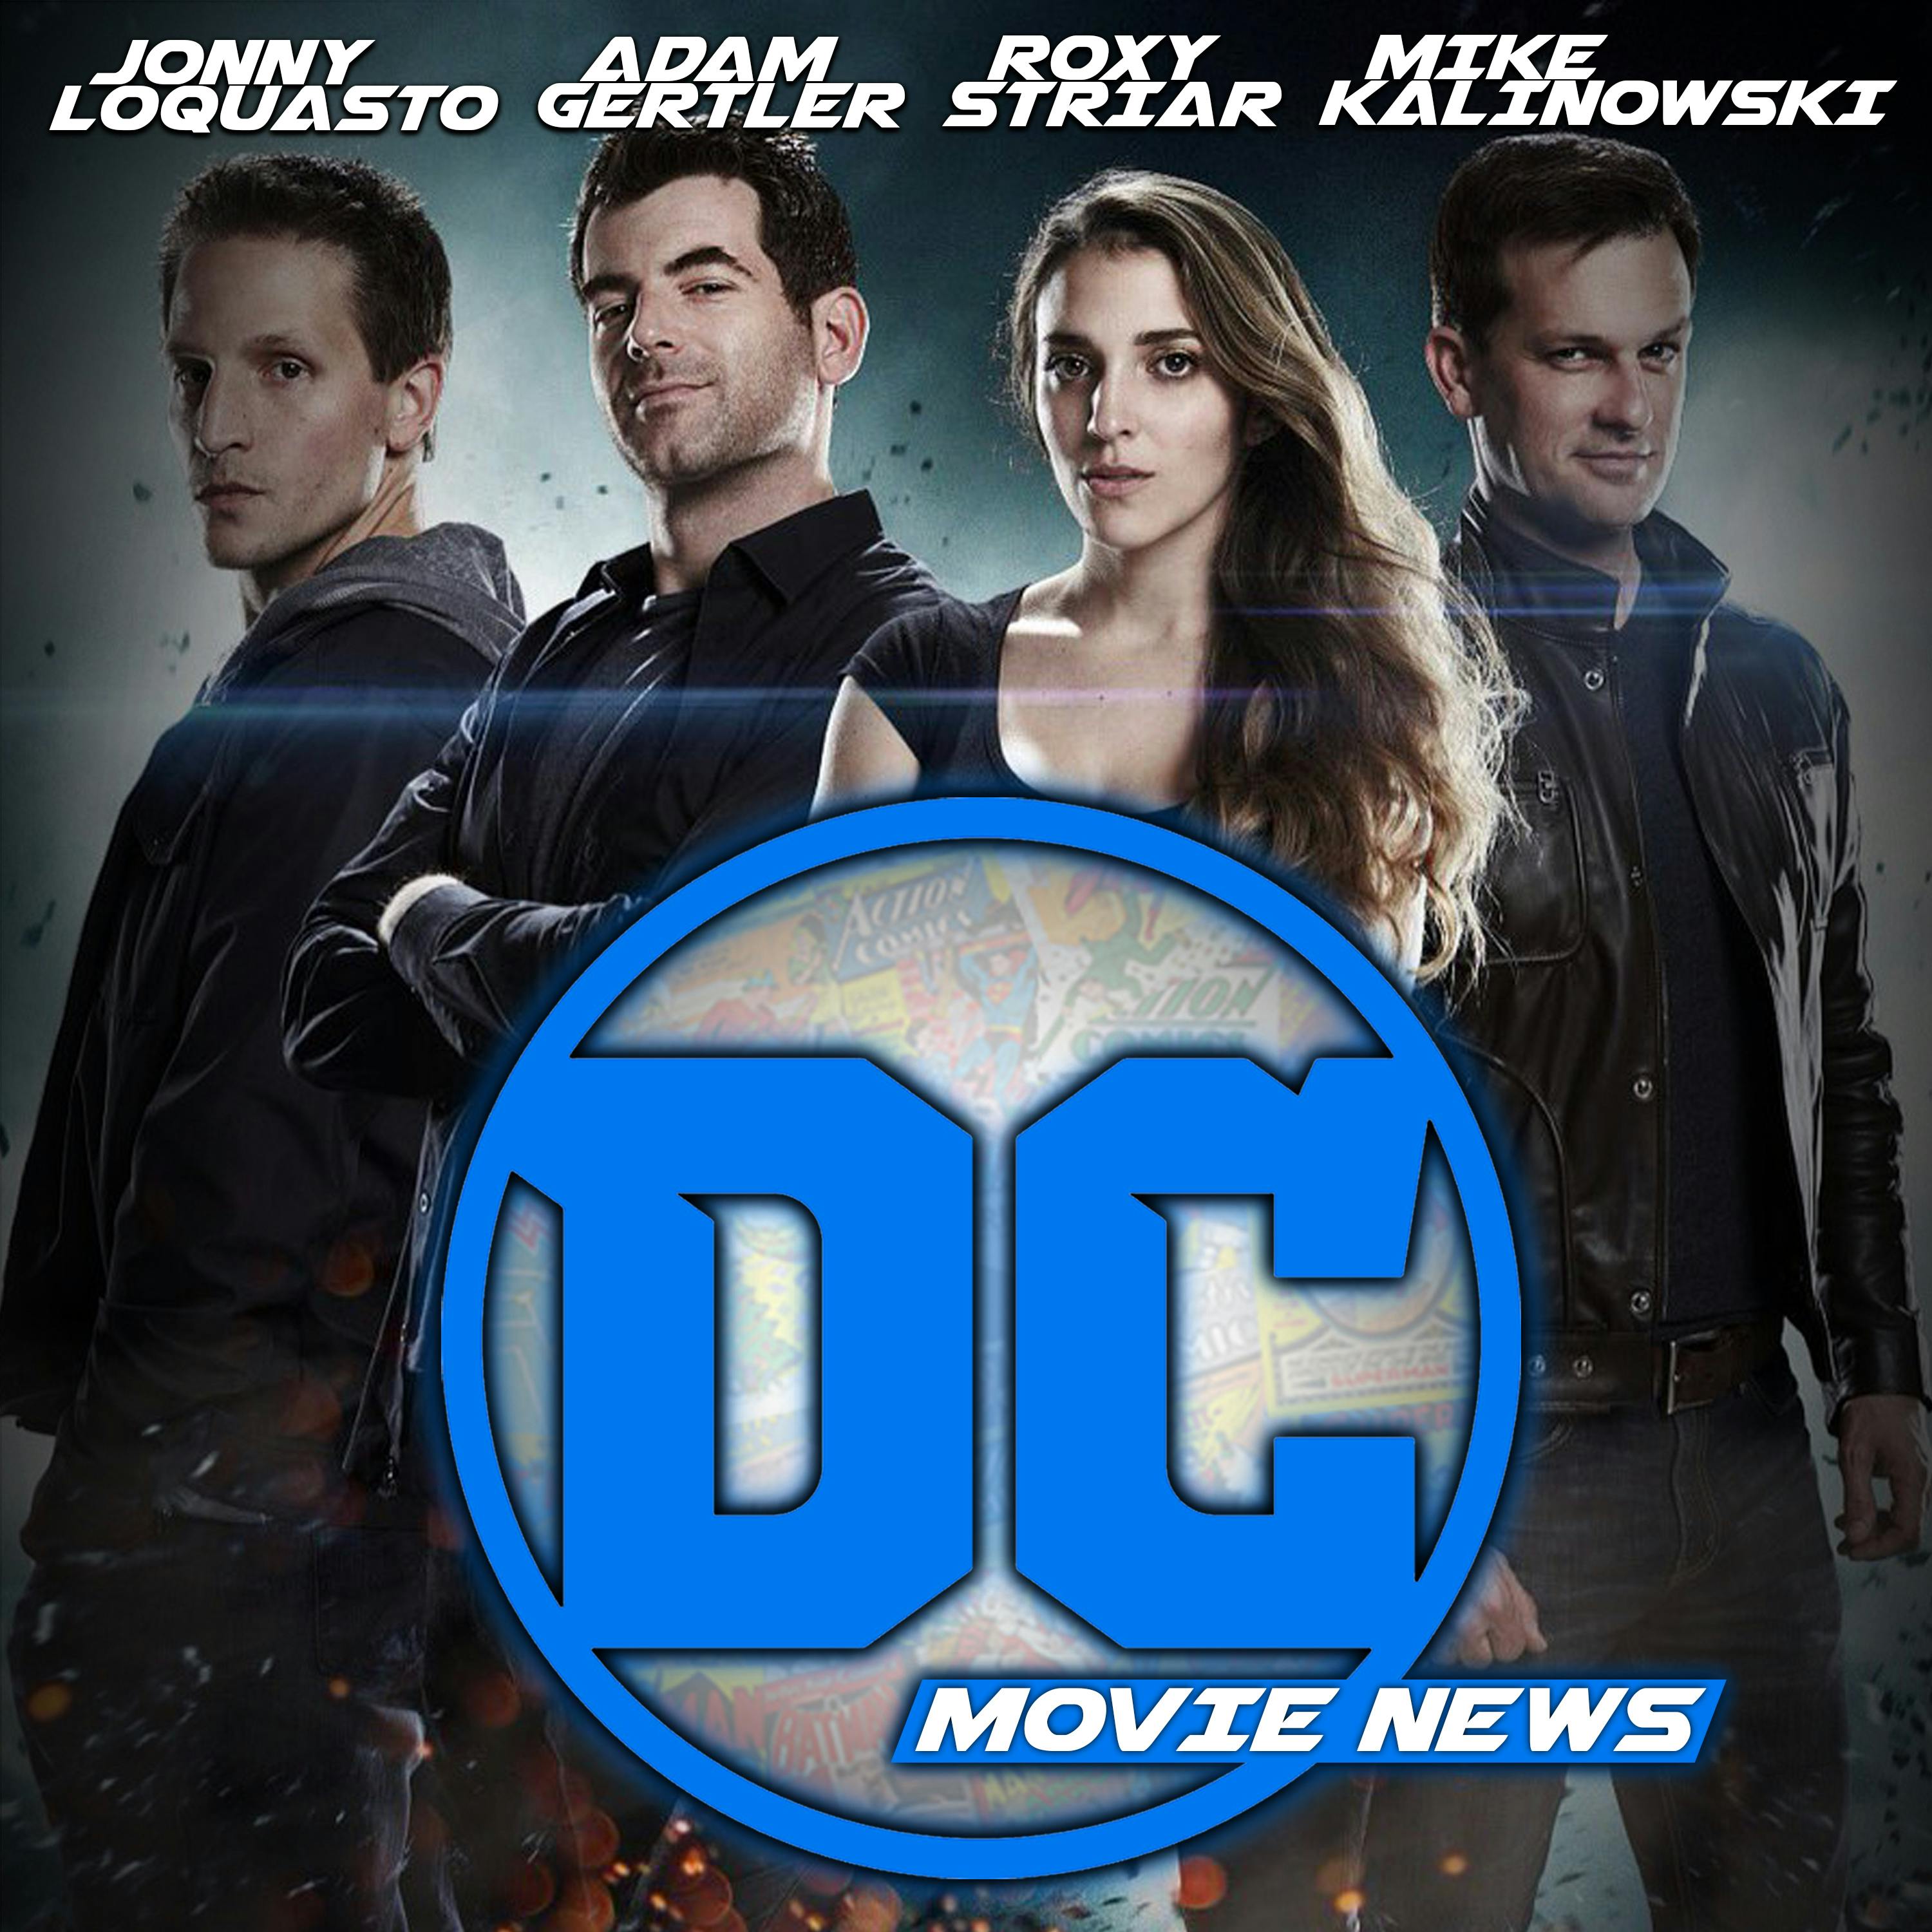 Batman v Superman: Dawn of Justice SPOILER REVIEW | DC Movie News for March 25th, 2016